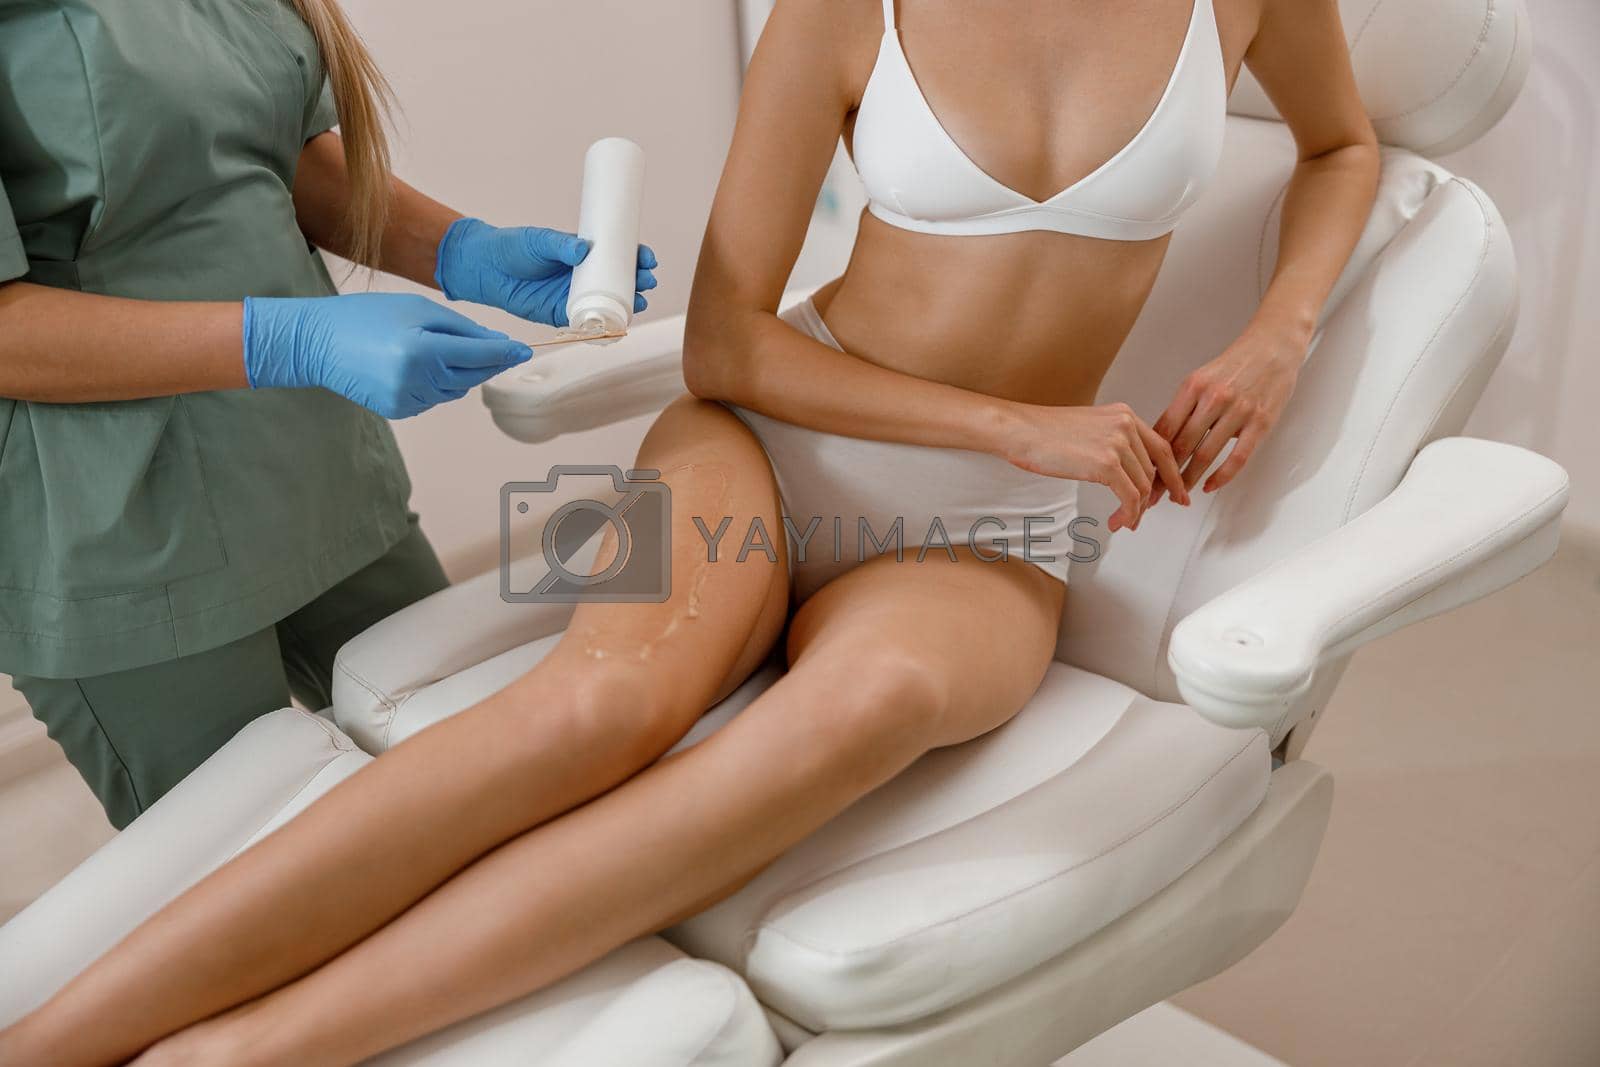 Cosmetologist applying ointment on client legs before photo epilation procedure. Hair removal